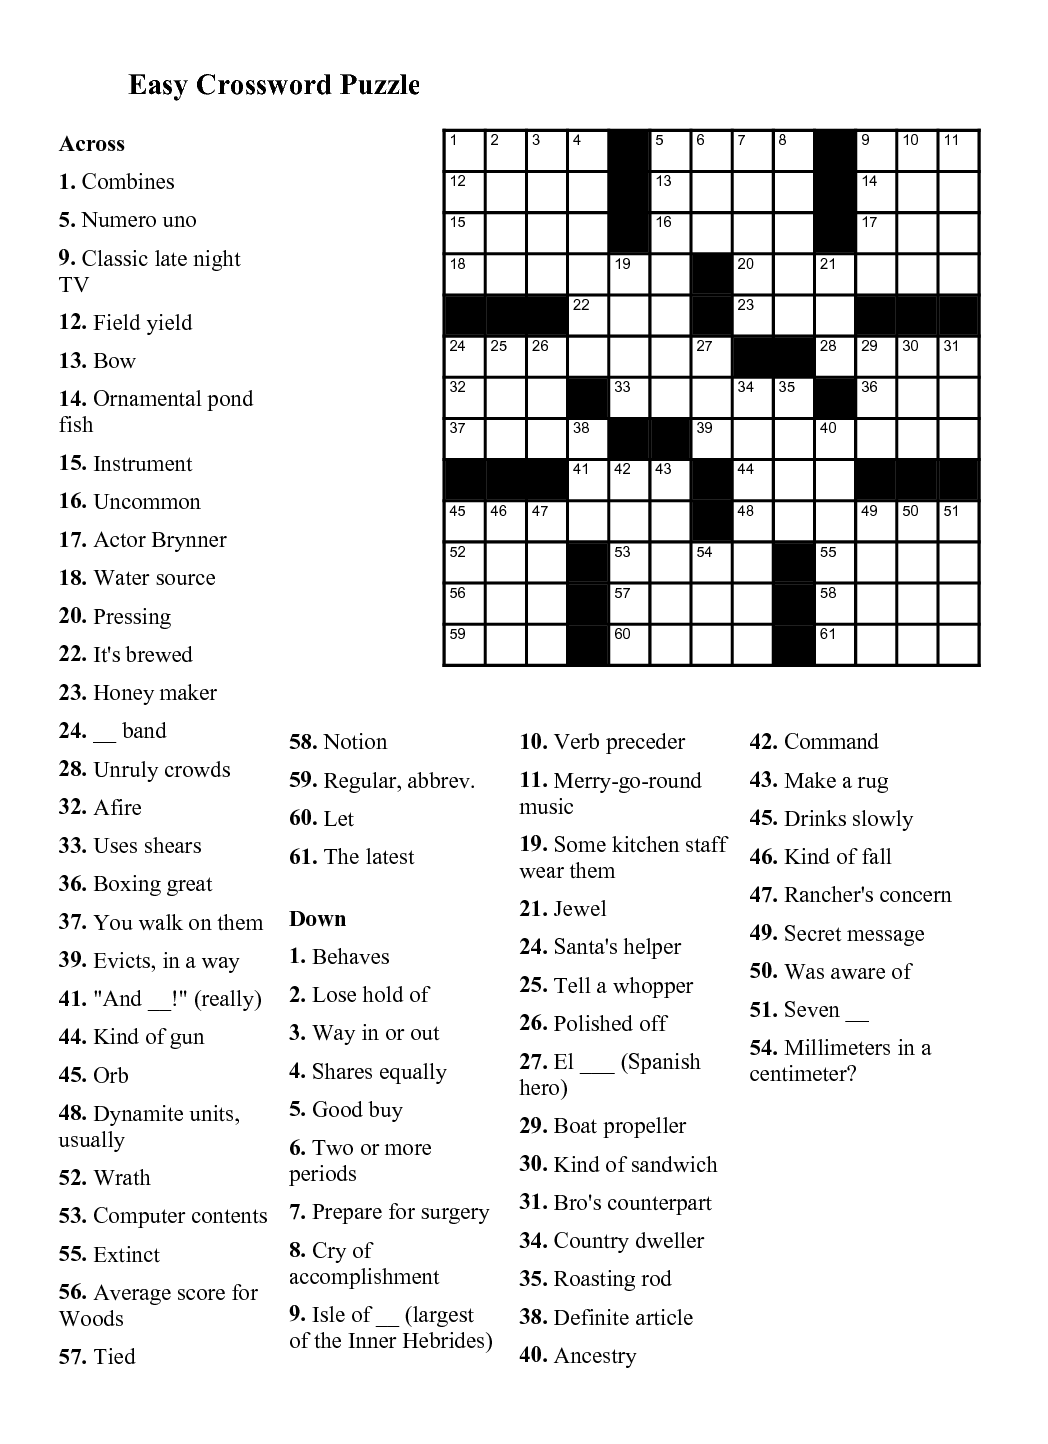 Easy Crossword Puzzles Printable Daily Template - Online Free Easy Daily Crossword Puzzle